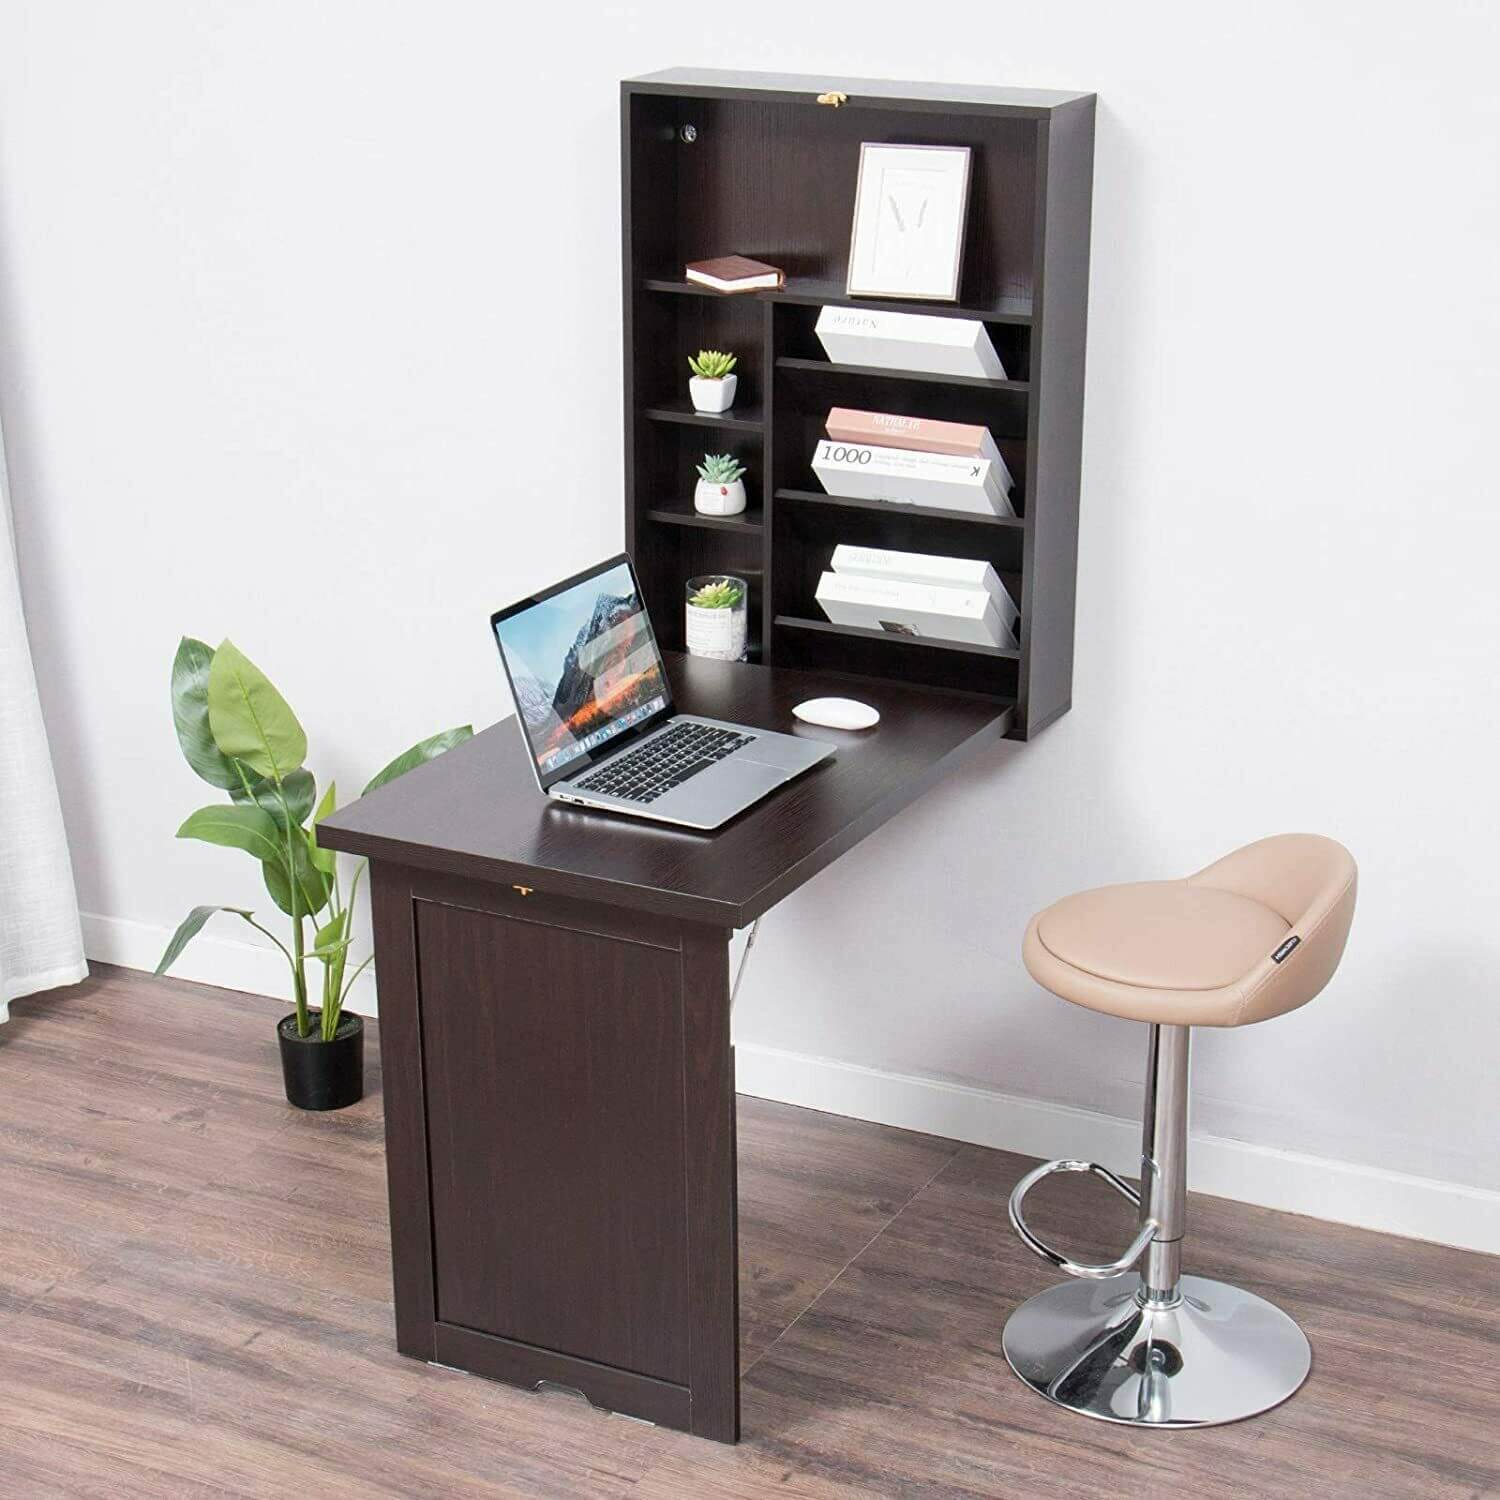 Elecwish Desk Walnut Wall Mounted Computer Desk HW1096 for work at home